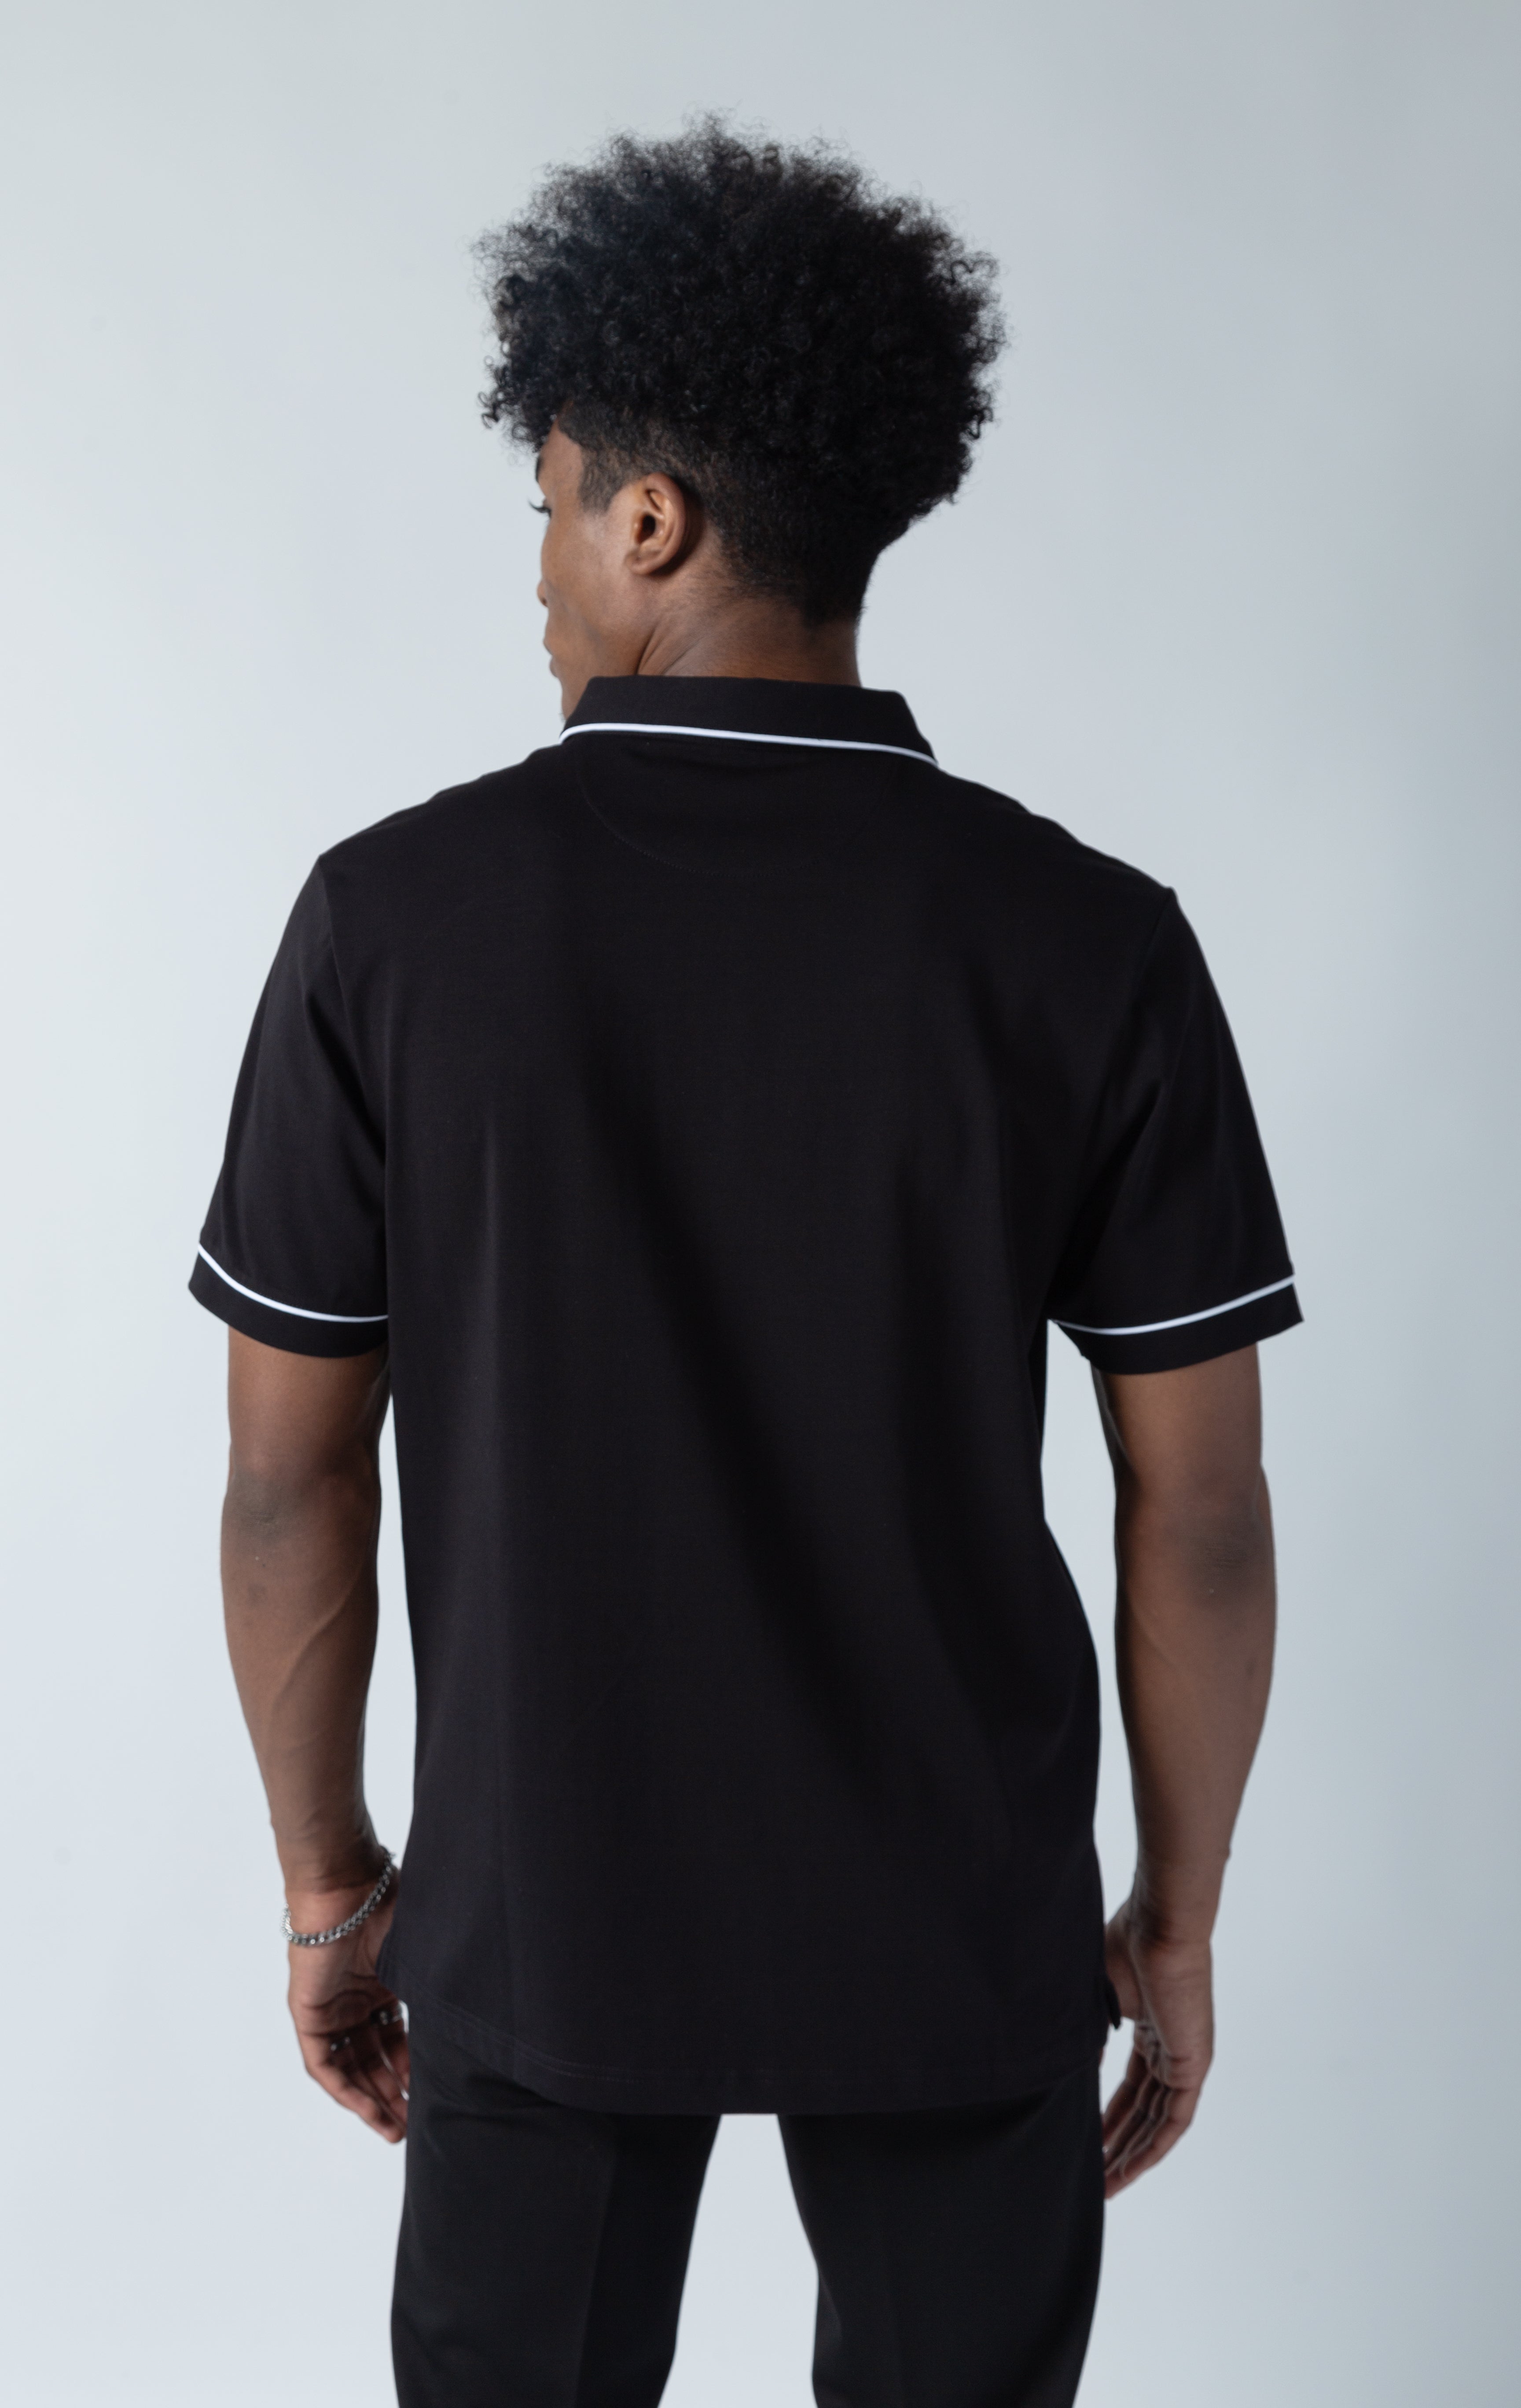 Black Luciano stretch premium jersey polo shirt with collared detailing, short-sleeved composition, three button front fastening. MAKOBI custom made design 